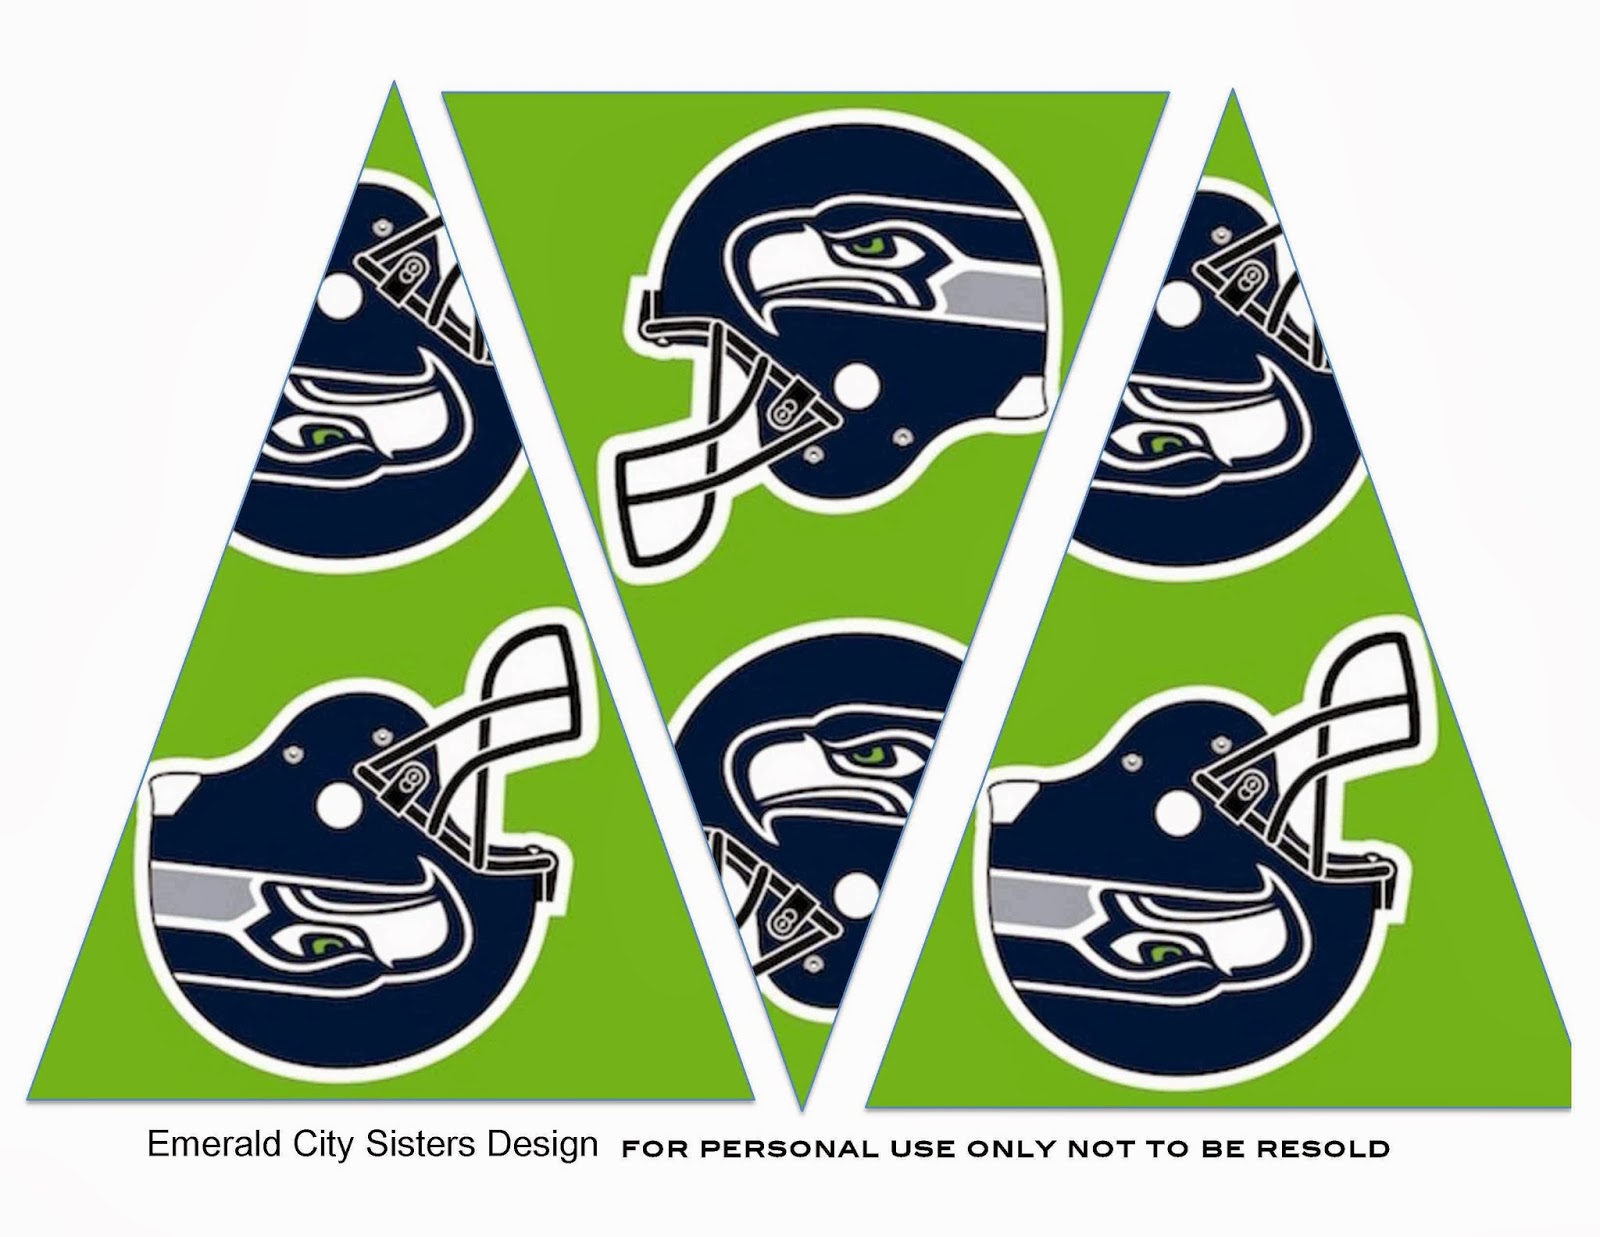 Emerald City Sisters ☽ ☾ Super Bowl Party Check it out Seahawks and